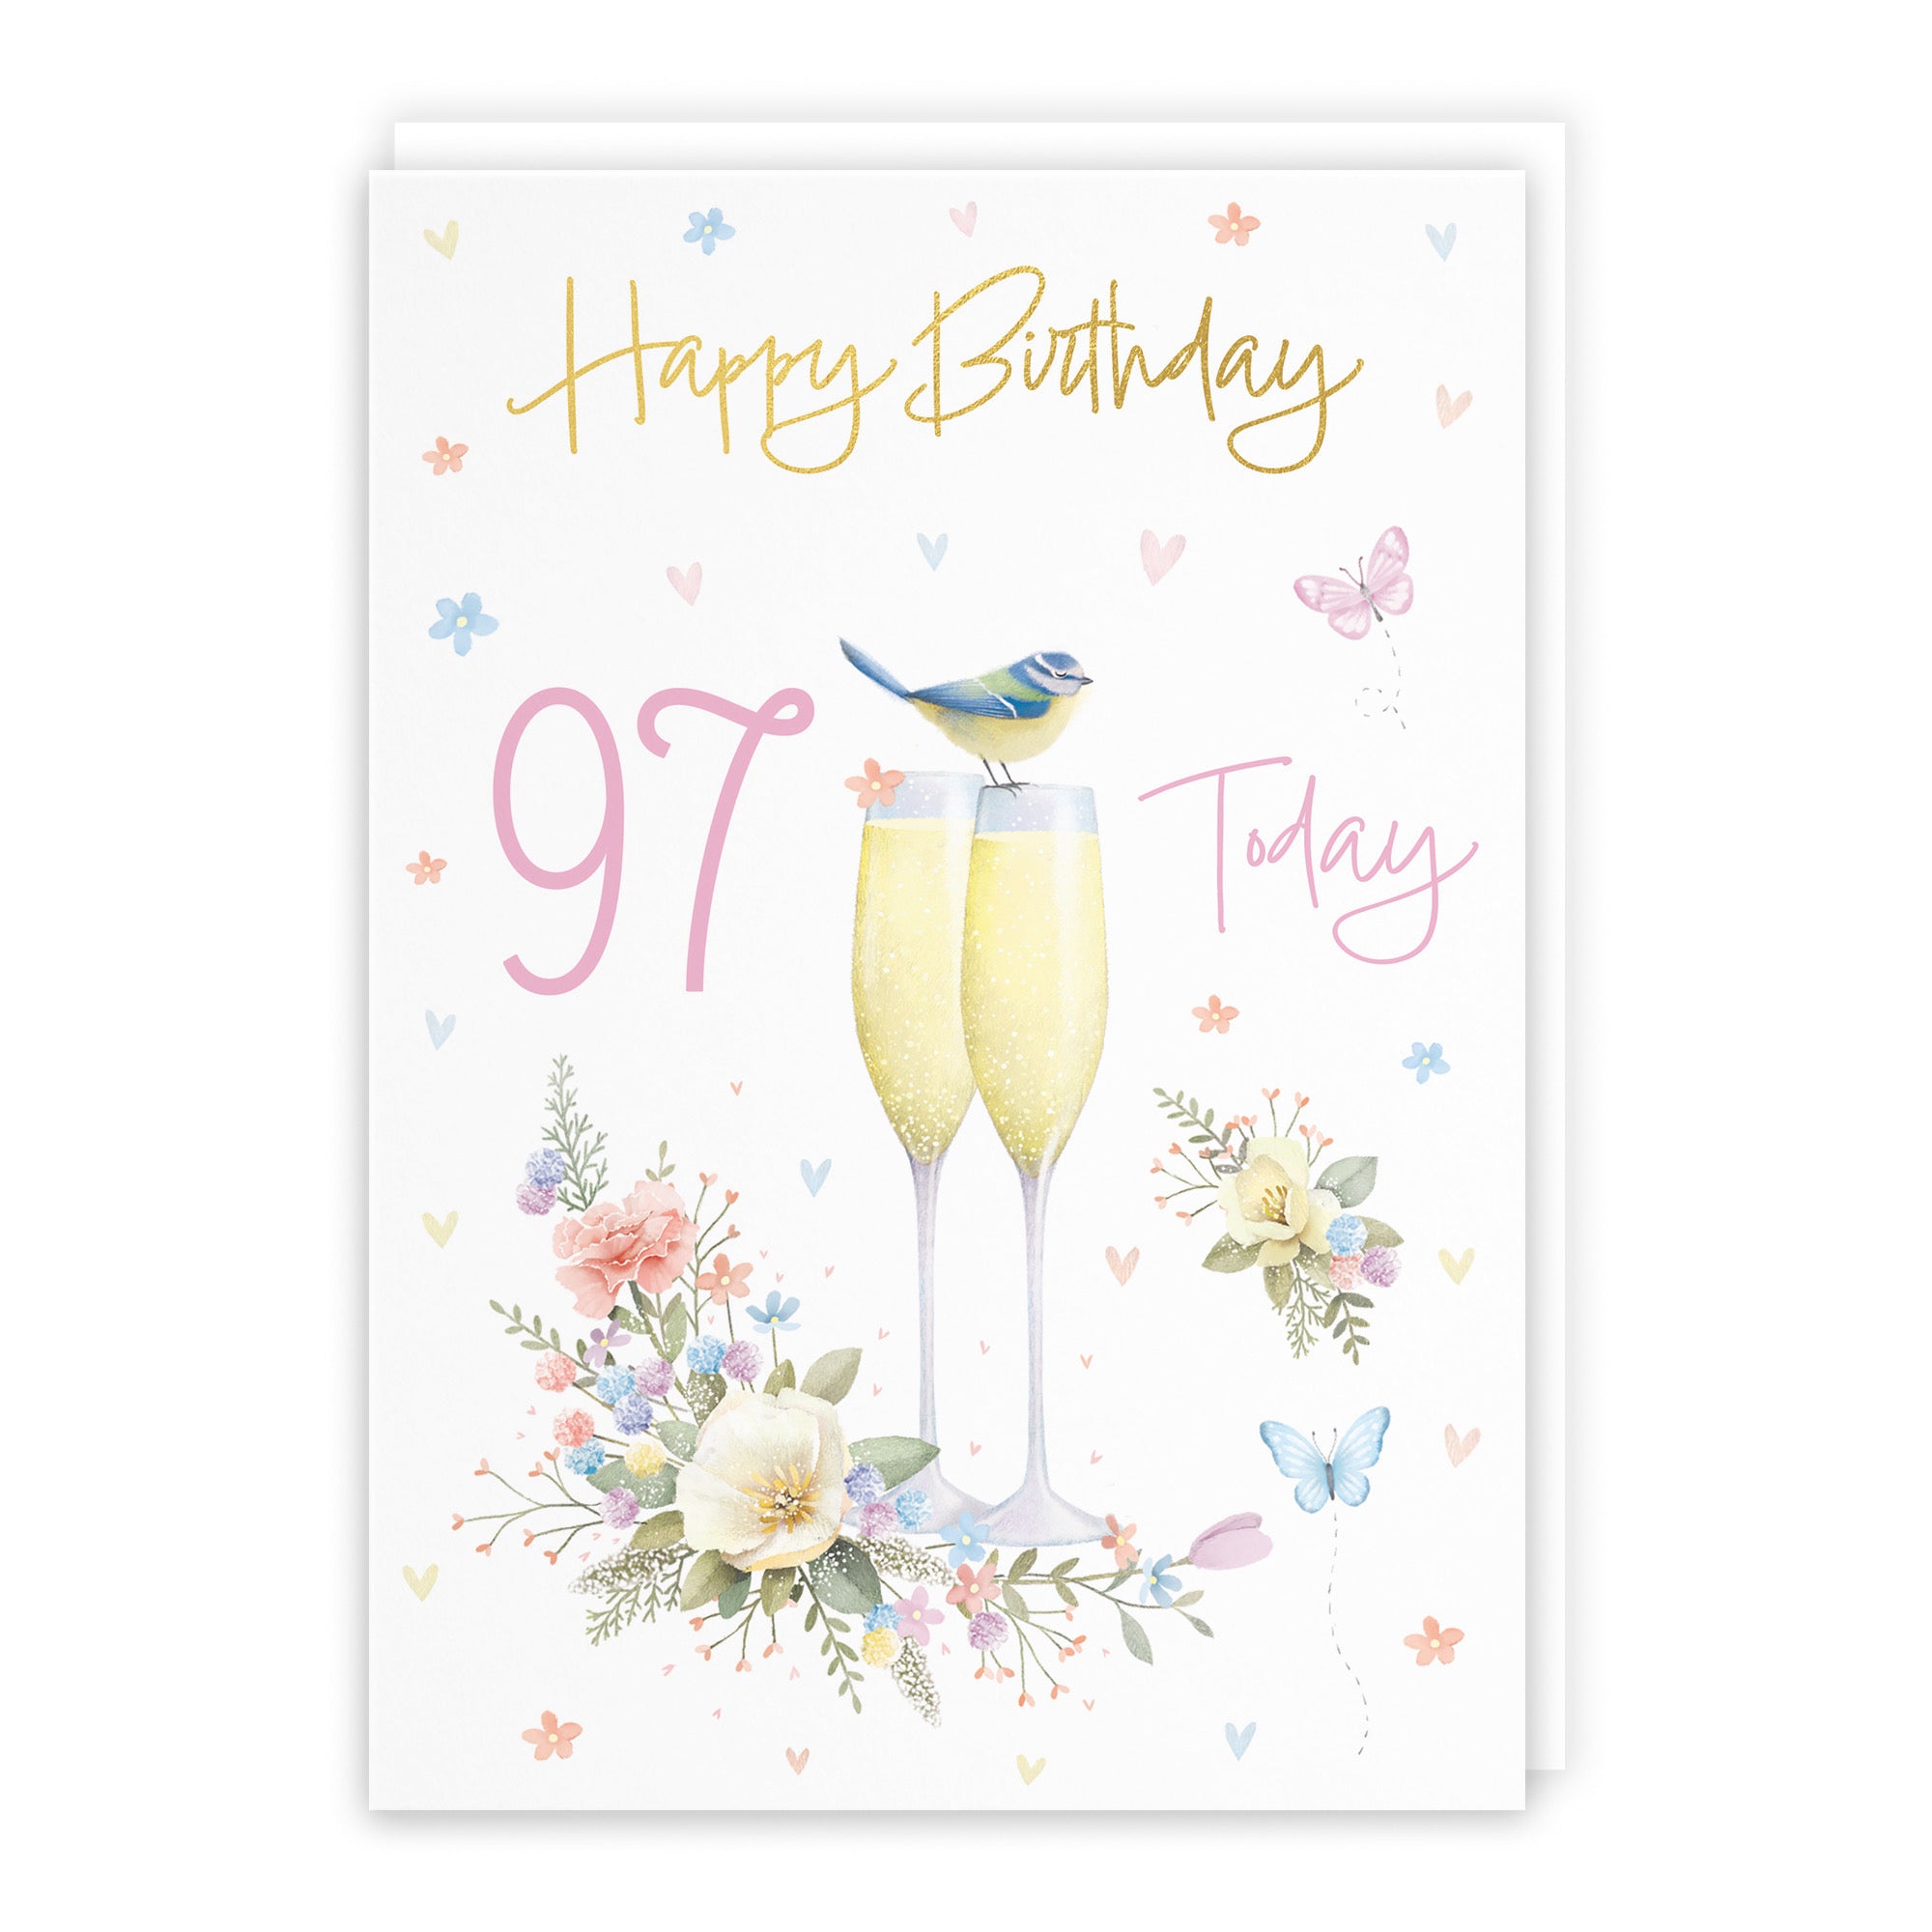 97th Champagne Flutes Gold Foil Birthday Card Milo's Gallery - Default Title (B0CZ497MY6)